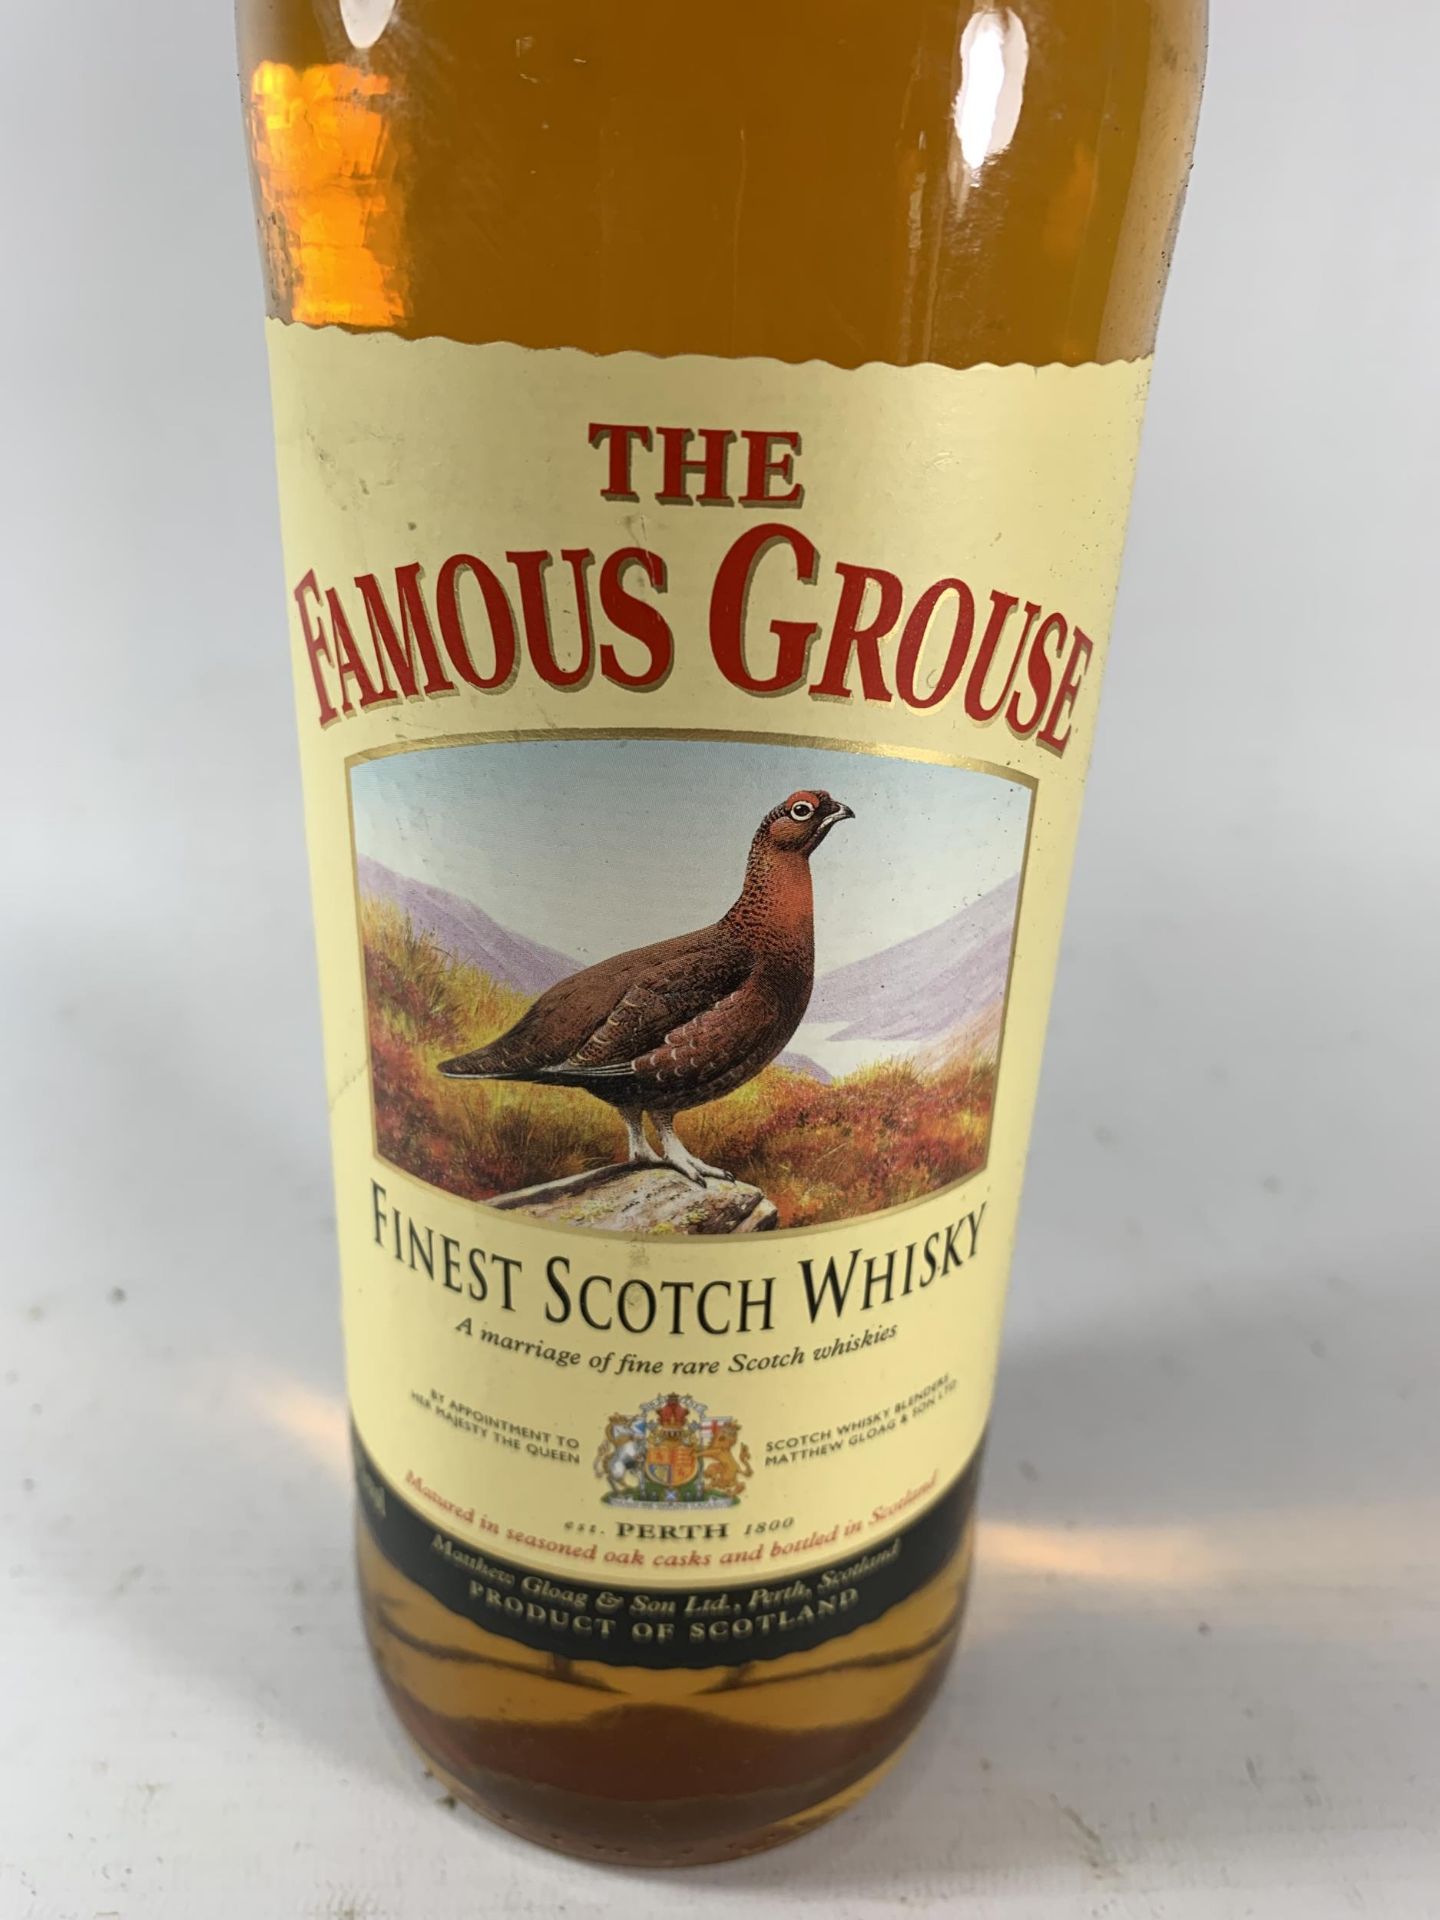 1 X 1L BOTTLE - THE FAMOUS GROUSE FINEST SCOTCH WHISKY - Image 2 of 3